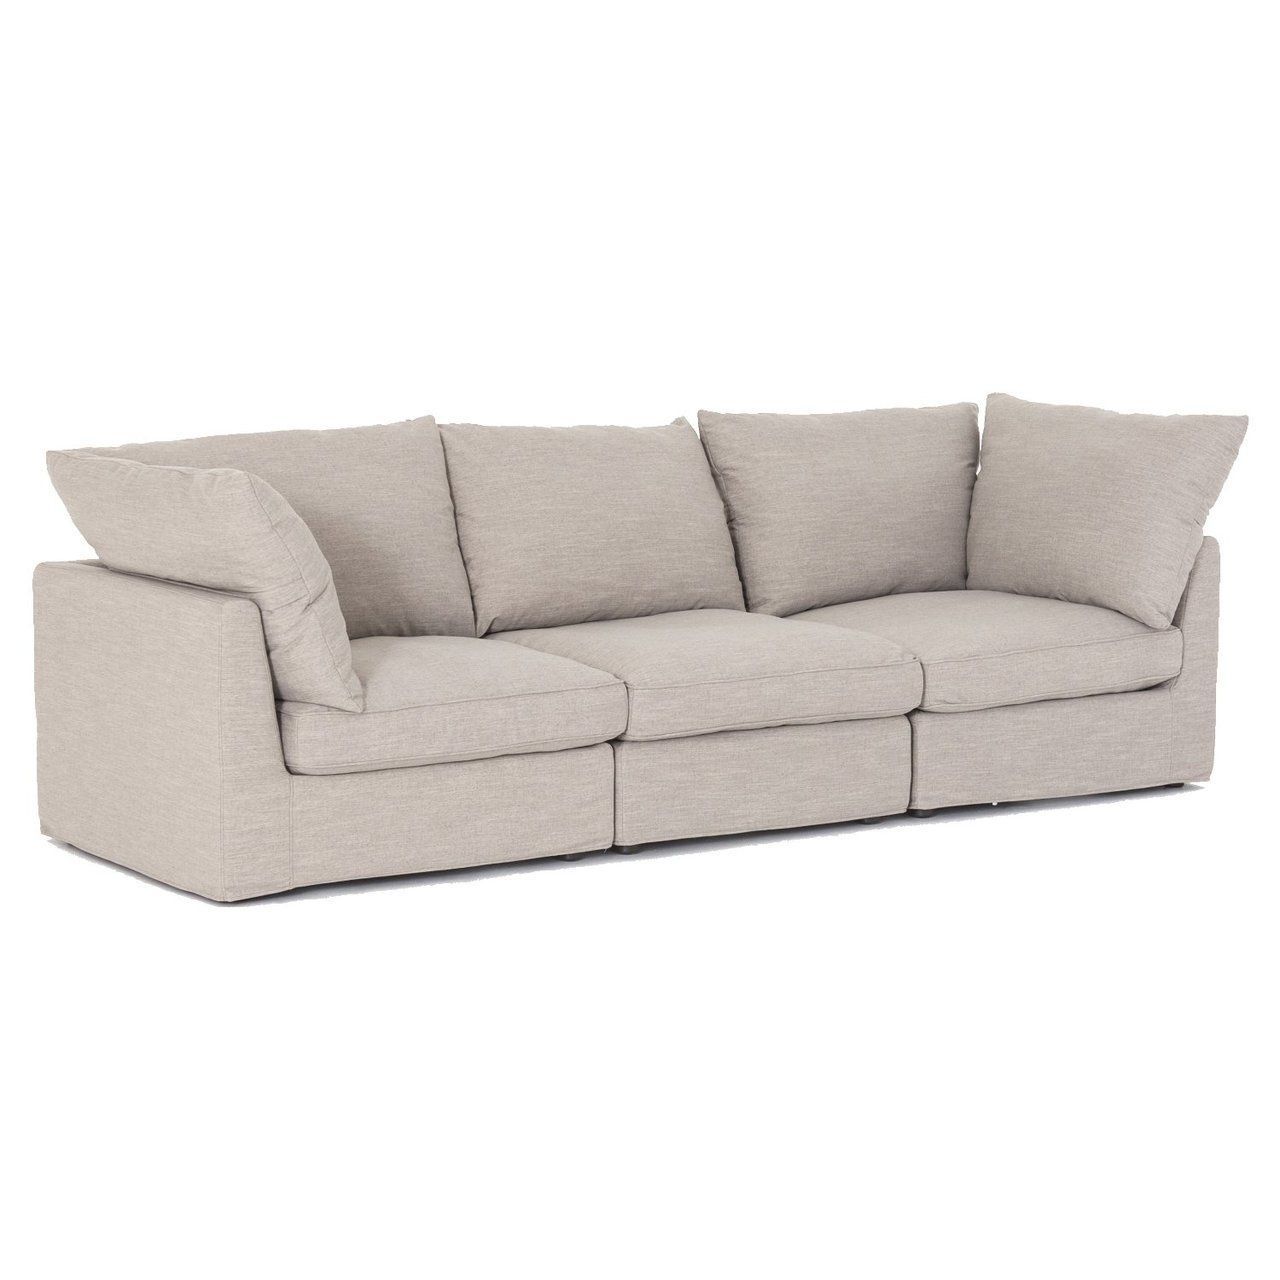 Harper Foam 3 Piece Sectional W/raf Chaise For Aquarius Light Grey 2 Piece Sectionals With Raf Chaise (View 26 of 30)